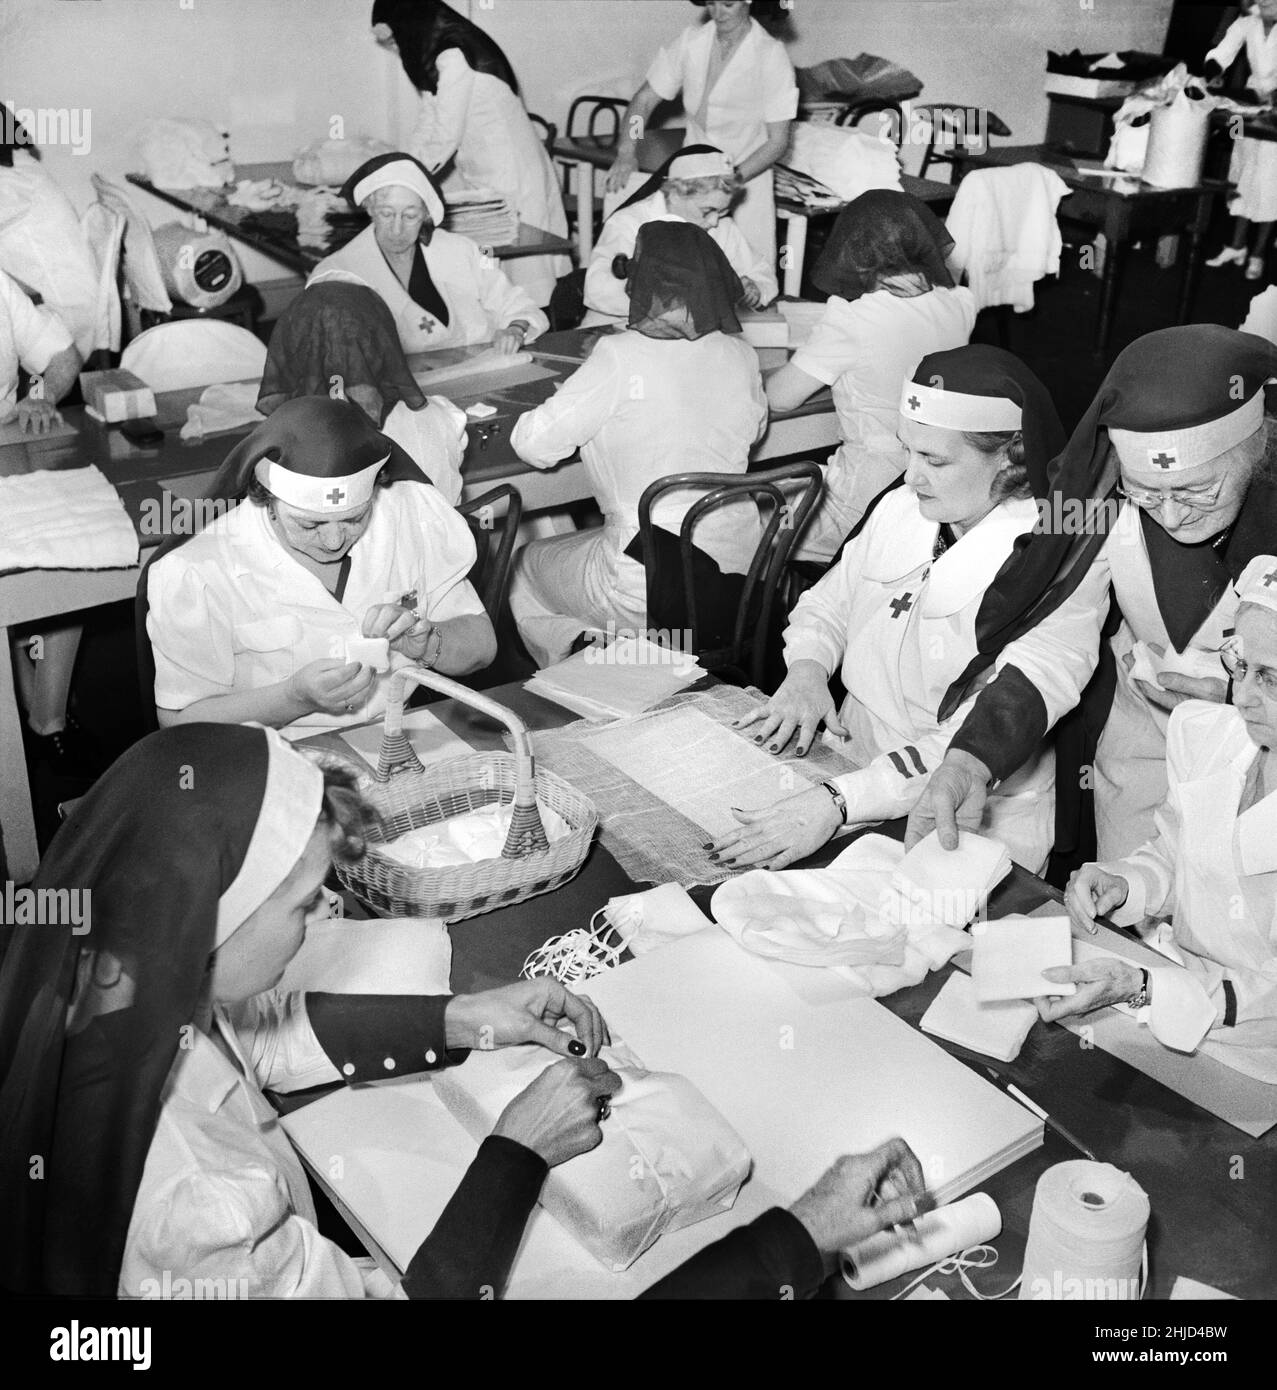 American Red Cross Women wrapping Bandages, San Francisco, California, USA, John Collier, Jr., U.S. Office of War Information/U.S. Farm Security Administration, December 1941 Stock Photo